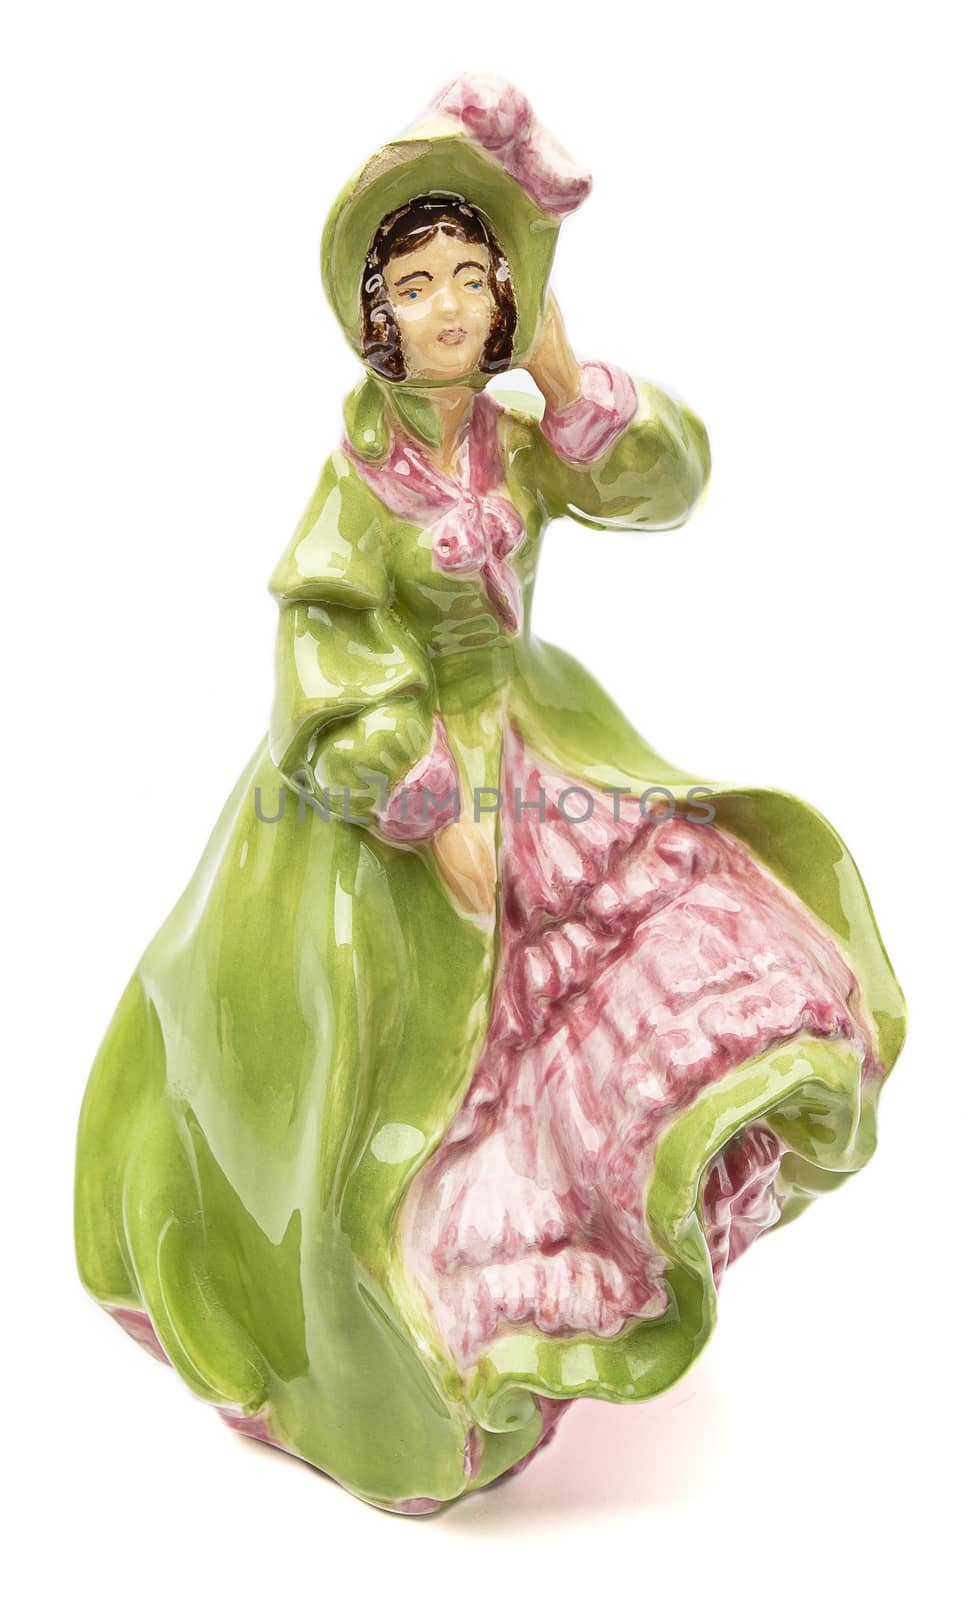 isolated porcelain figurine of a southern belle